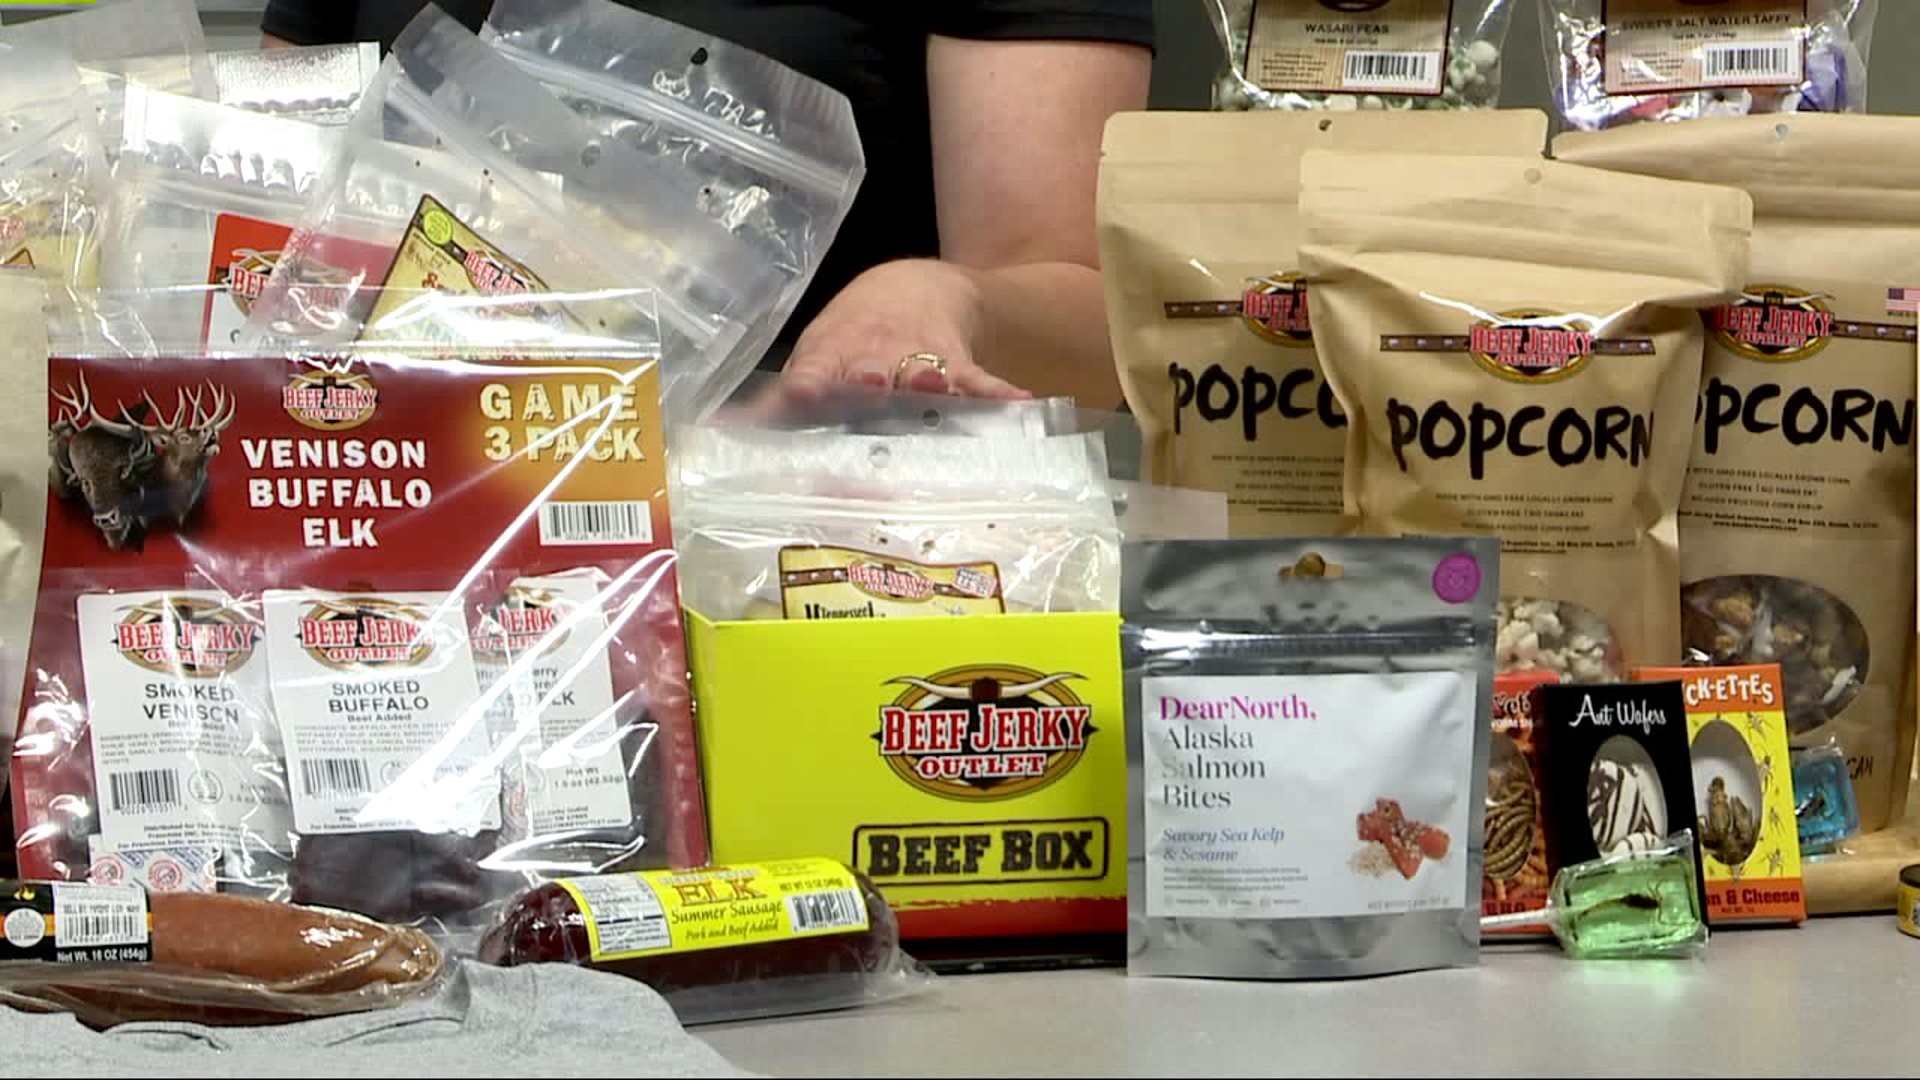 Beef Jerky Outlet stops by in celebration of National Jerky Day